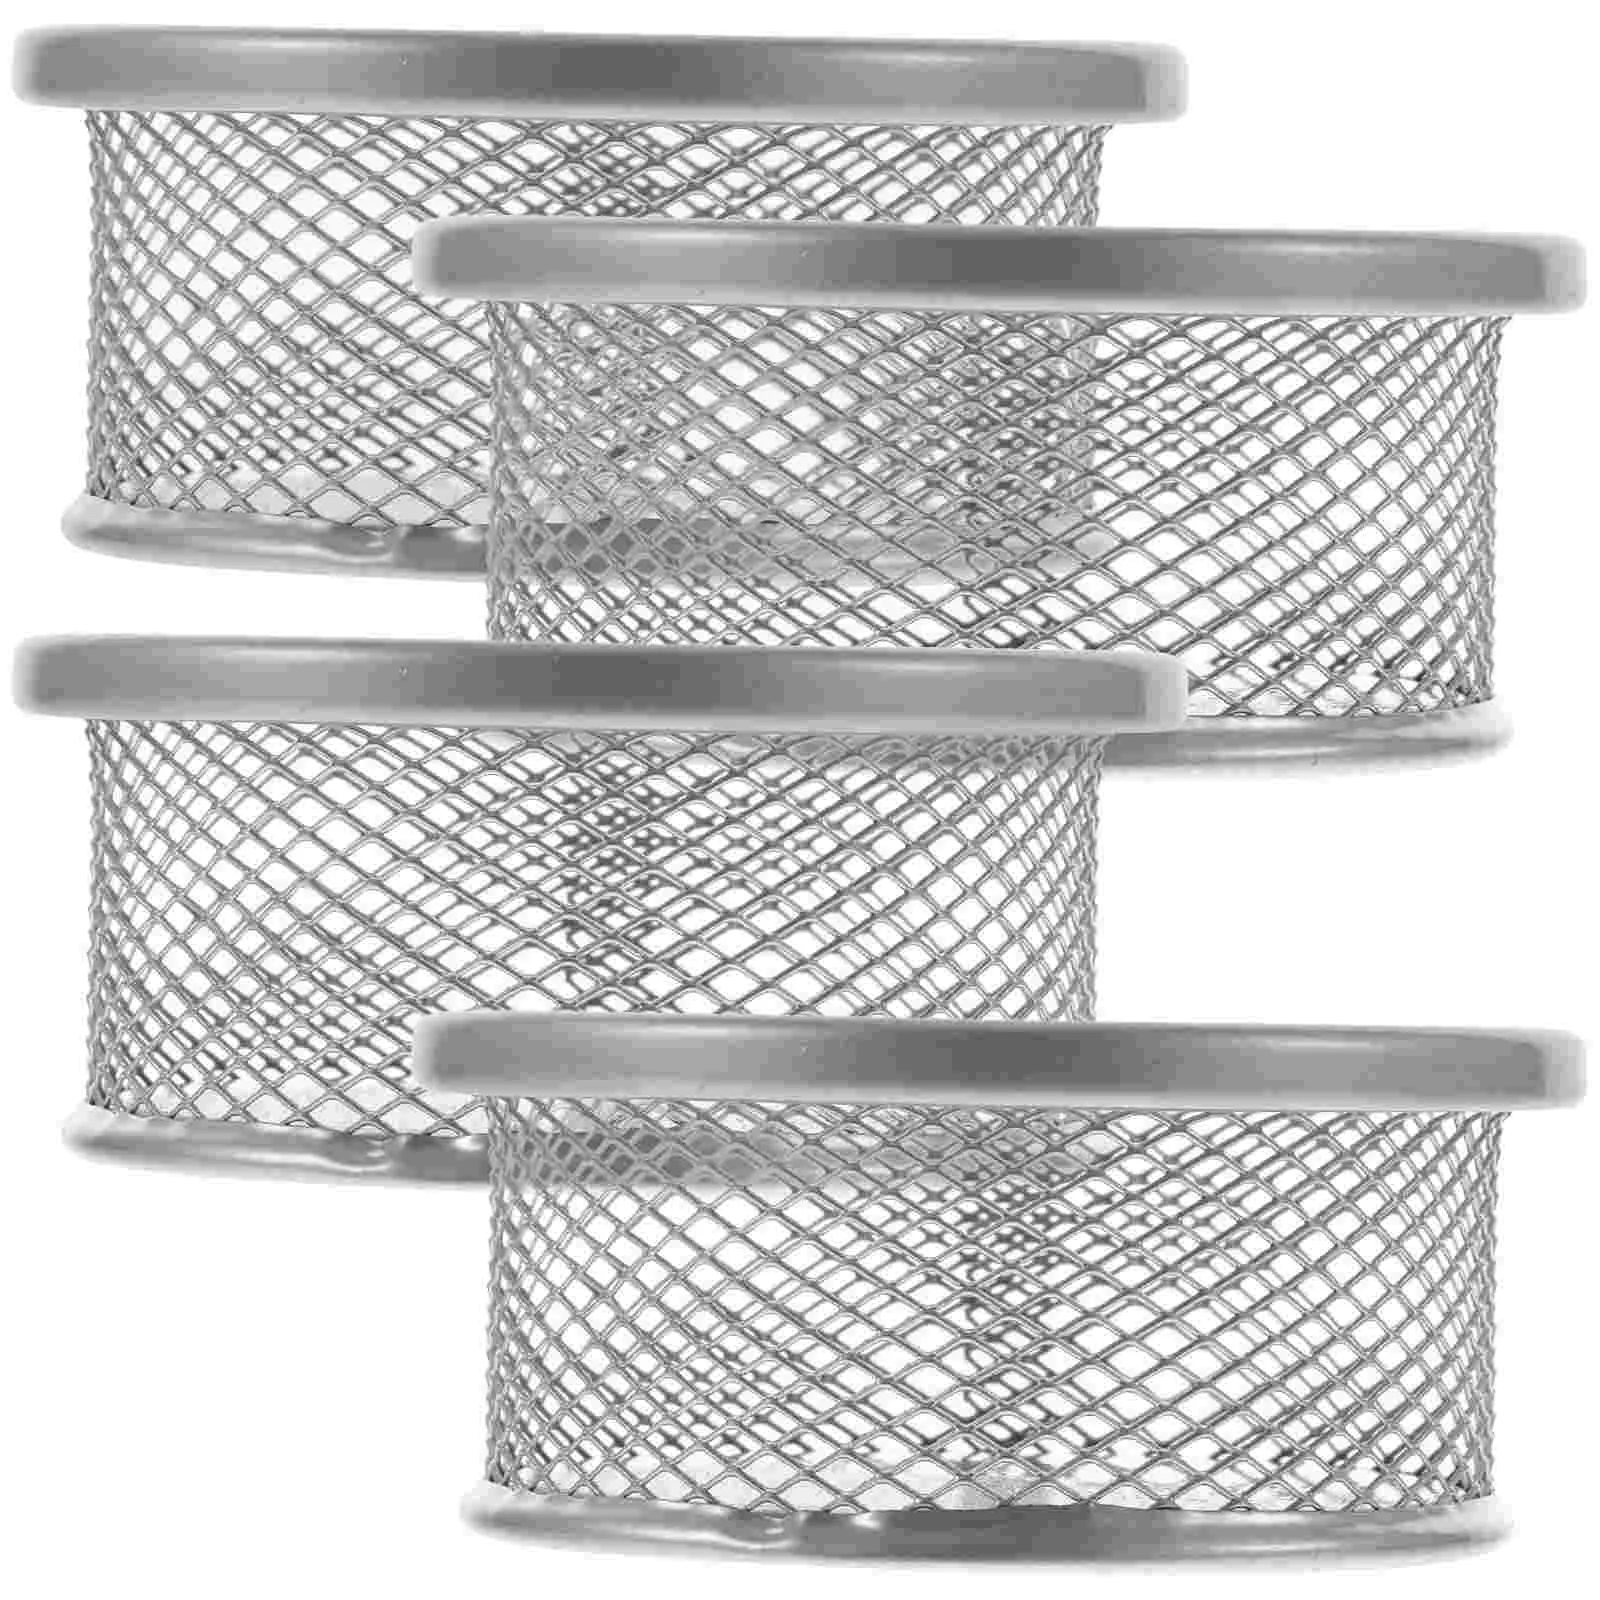 

4Pcs Paperclip Mesh Baskets Sundries Storage Holders Office Storage Bucket for Clips